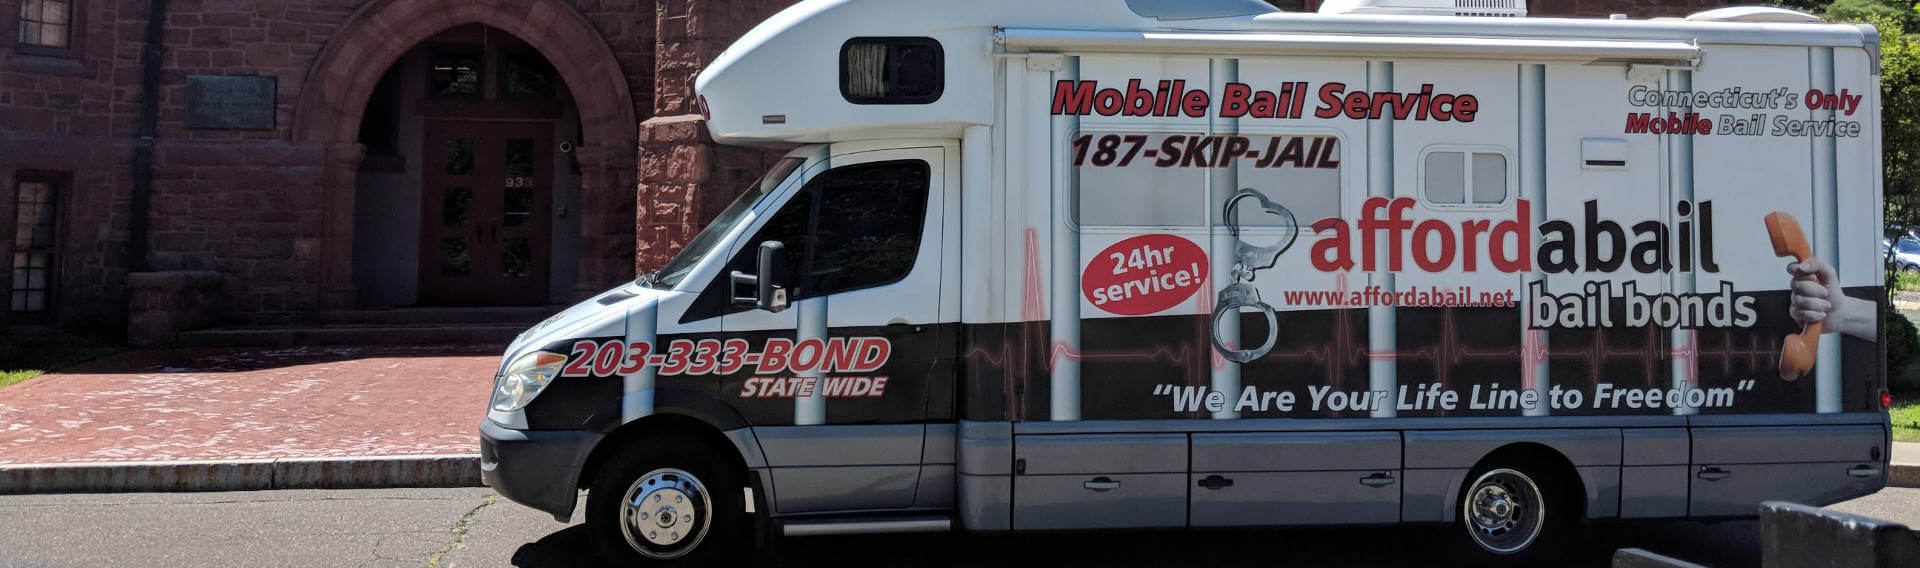 Mobile bail bonds service in Wethersfield CT